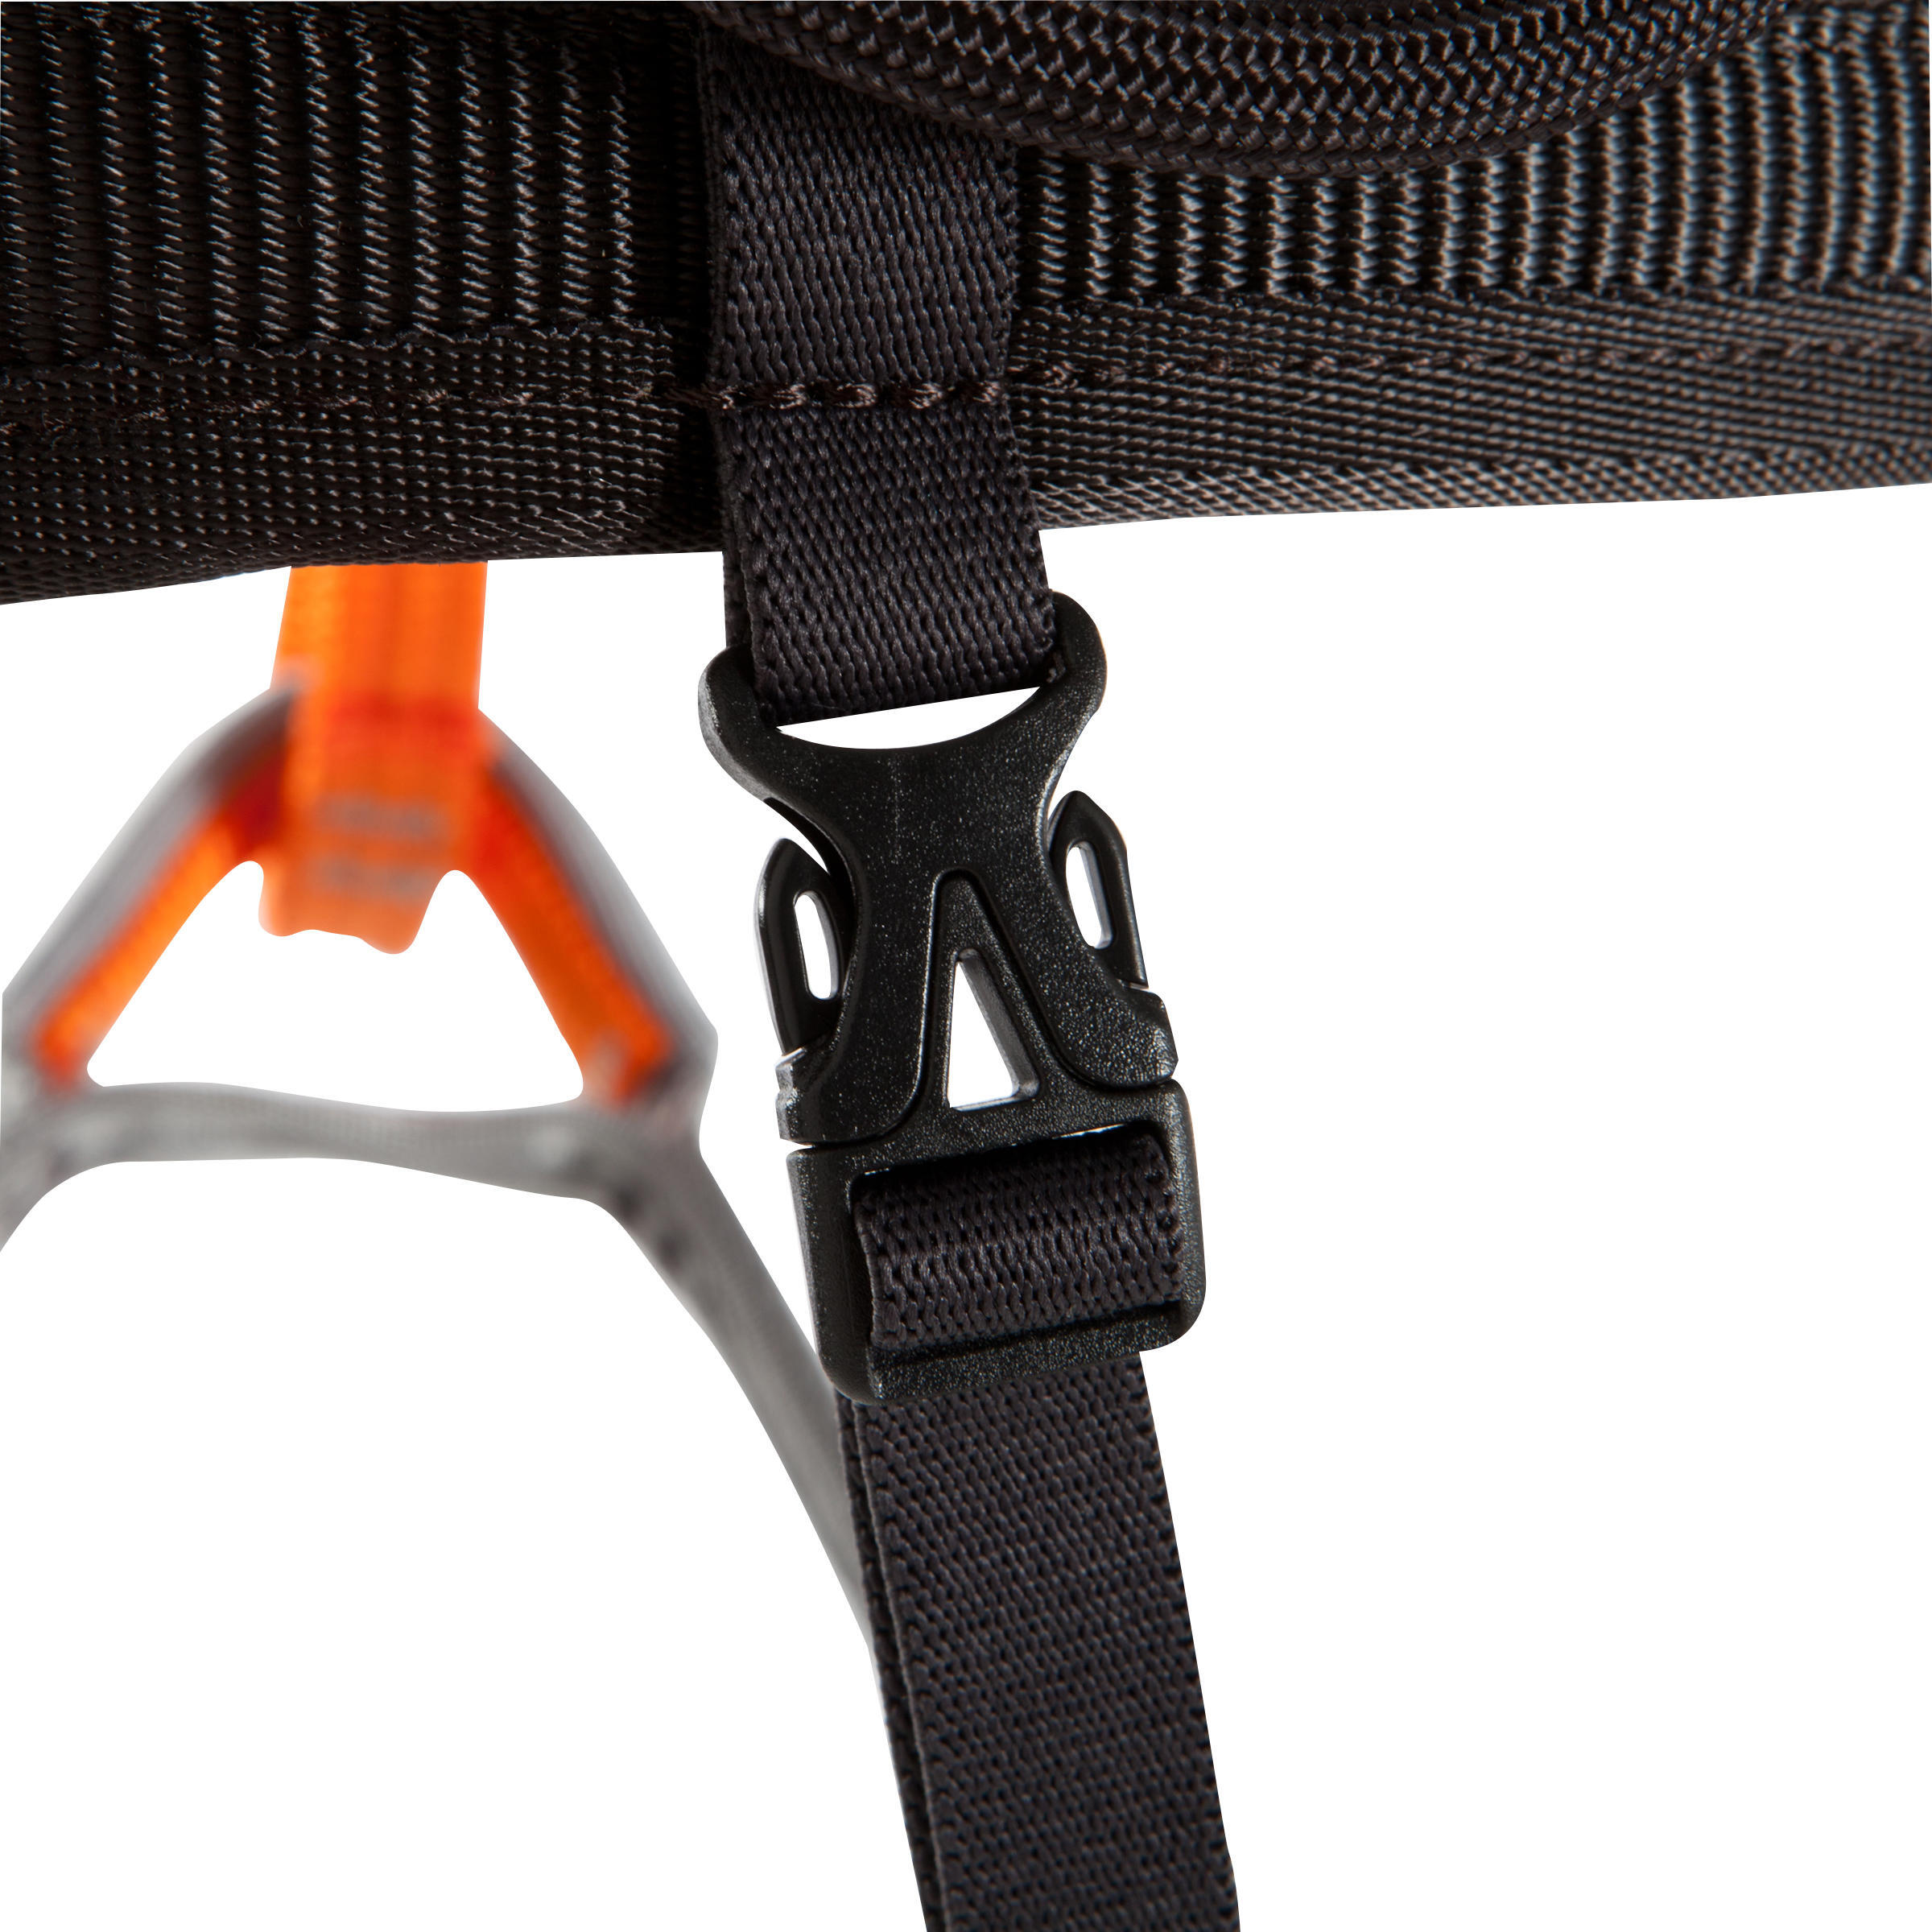 CLIMBING AND MOUNTAINEERING HARNESS - ROCK BLACK GREY 6/7